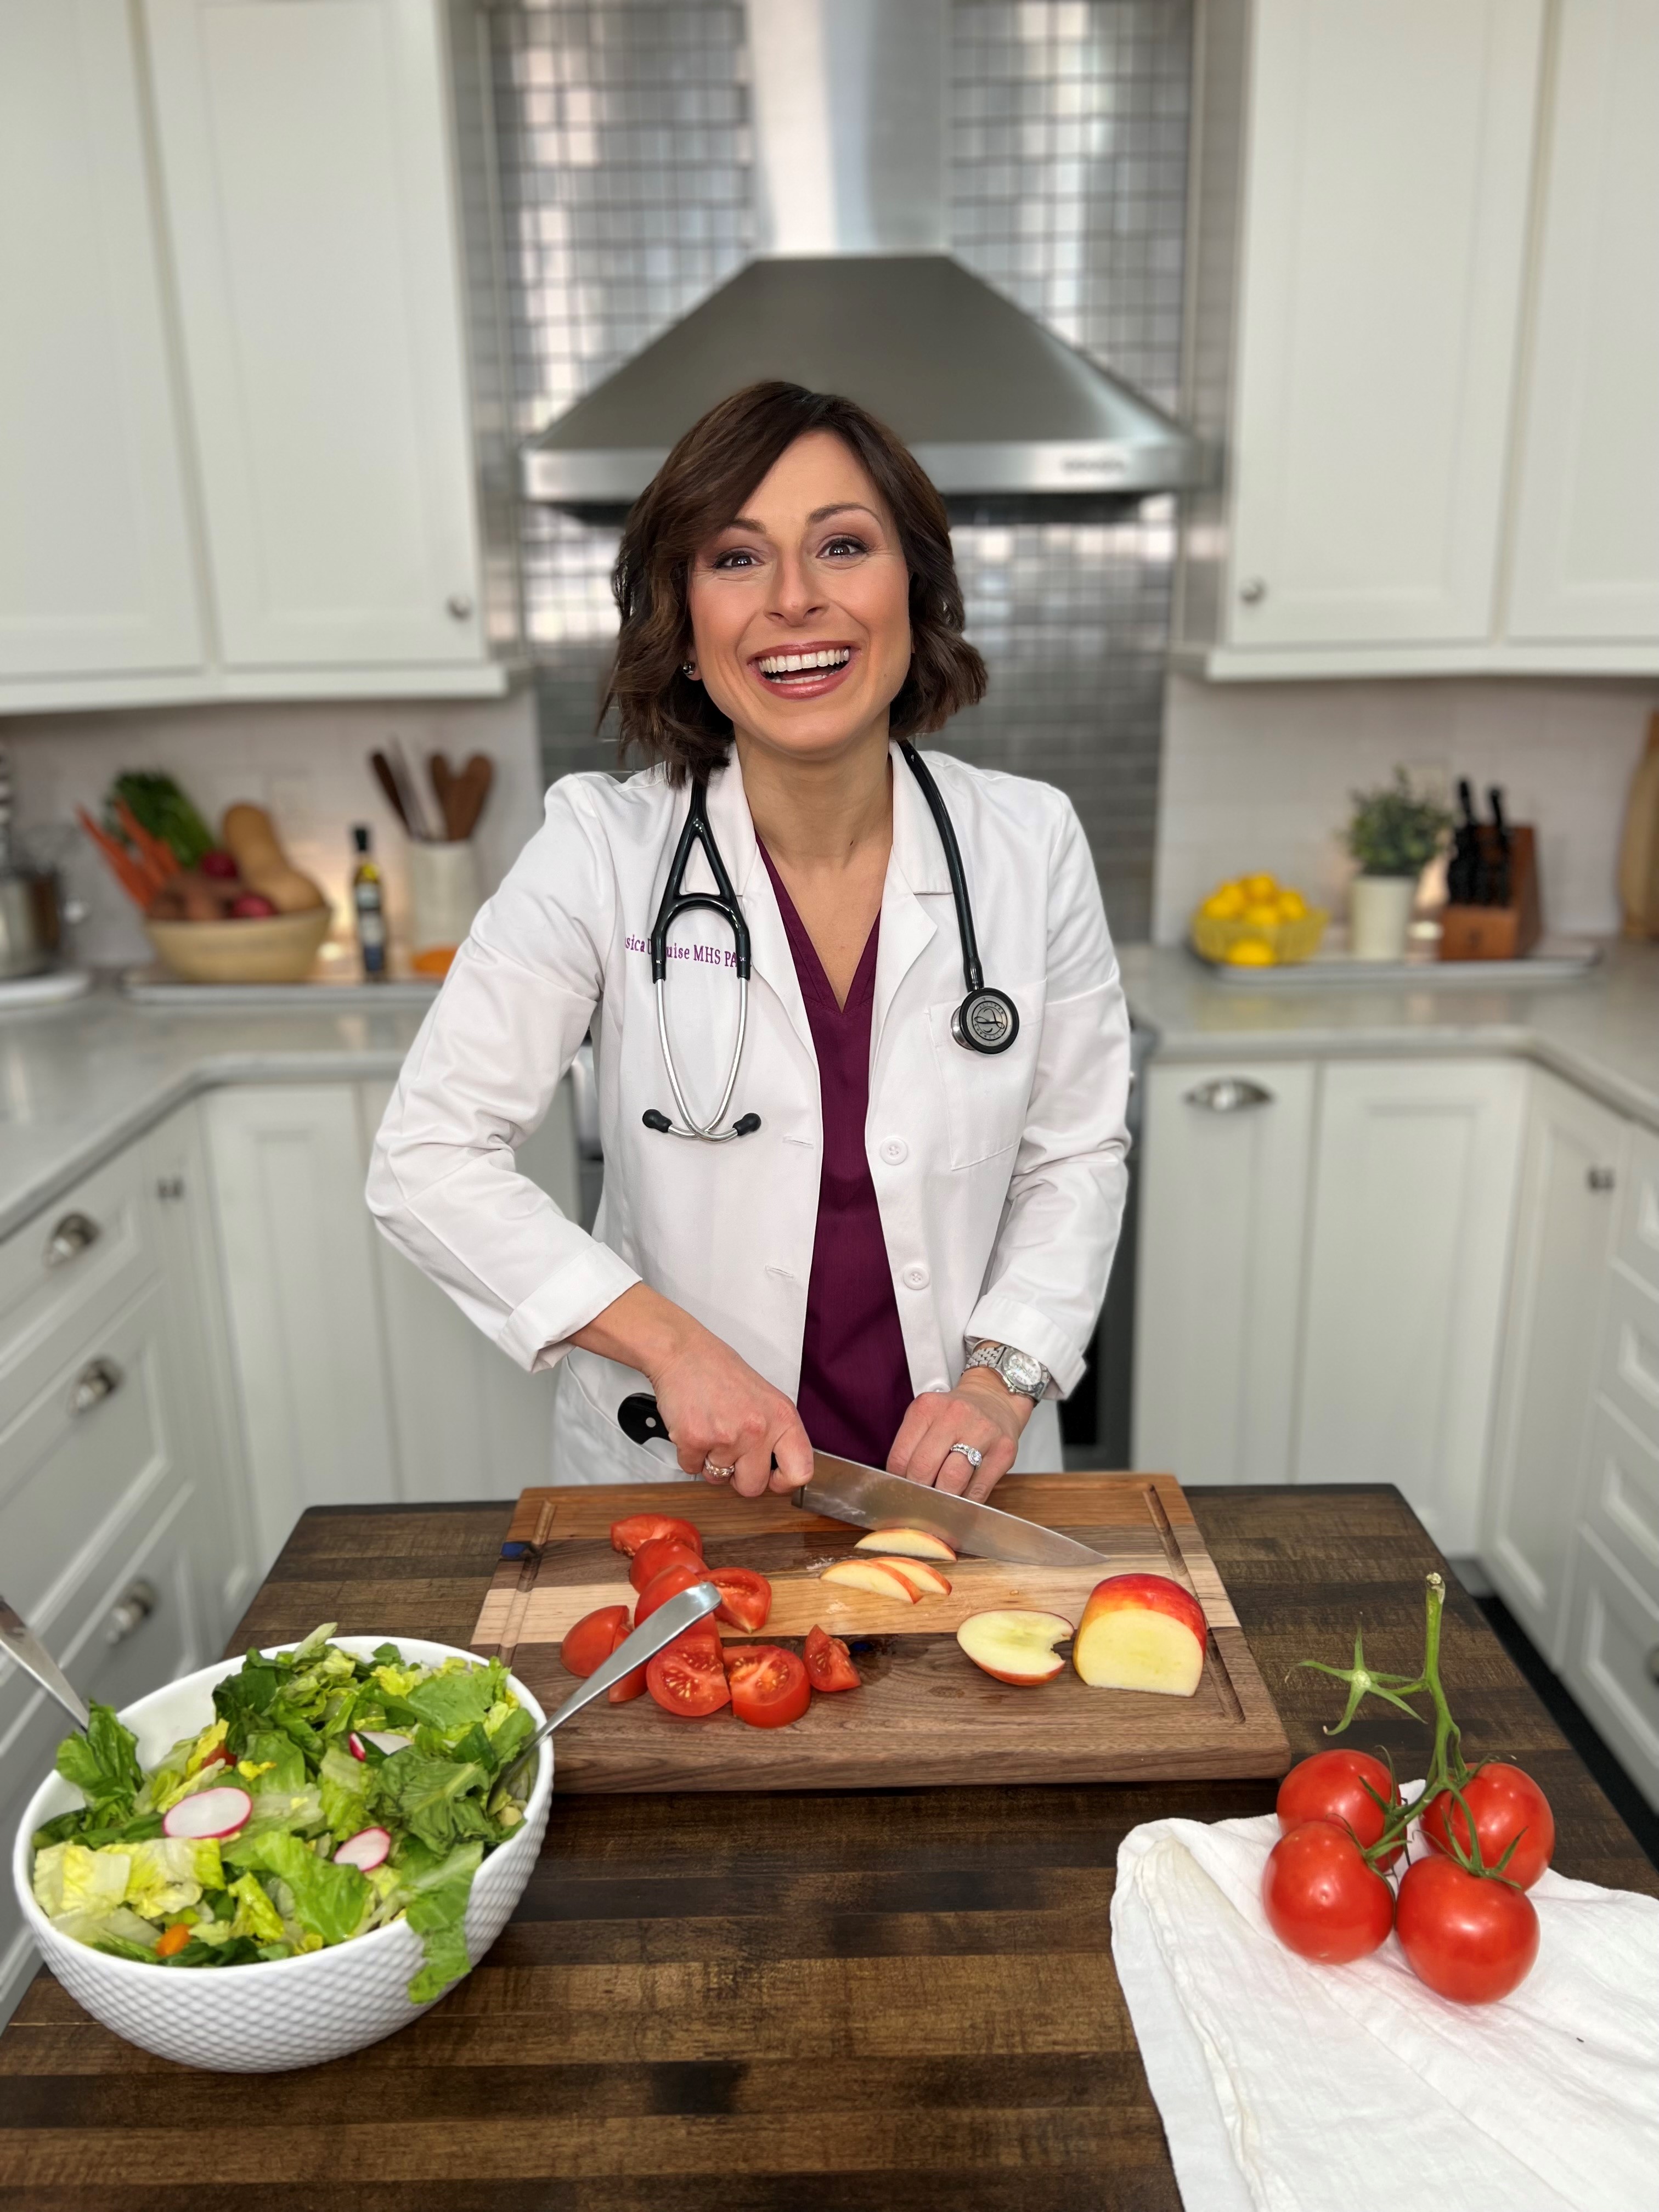 Alumna Jessica DeLuise wearing white coat and stethoscope in kitchen preparing healthy food